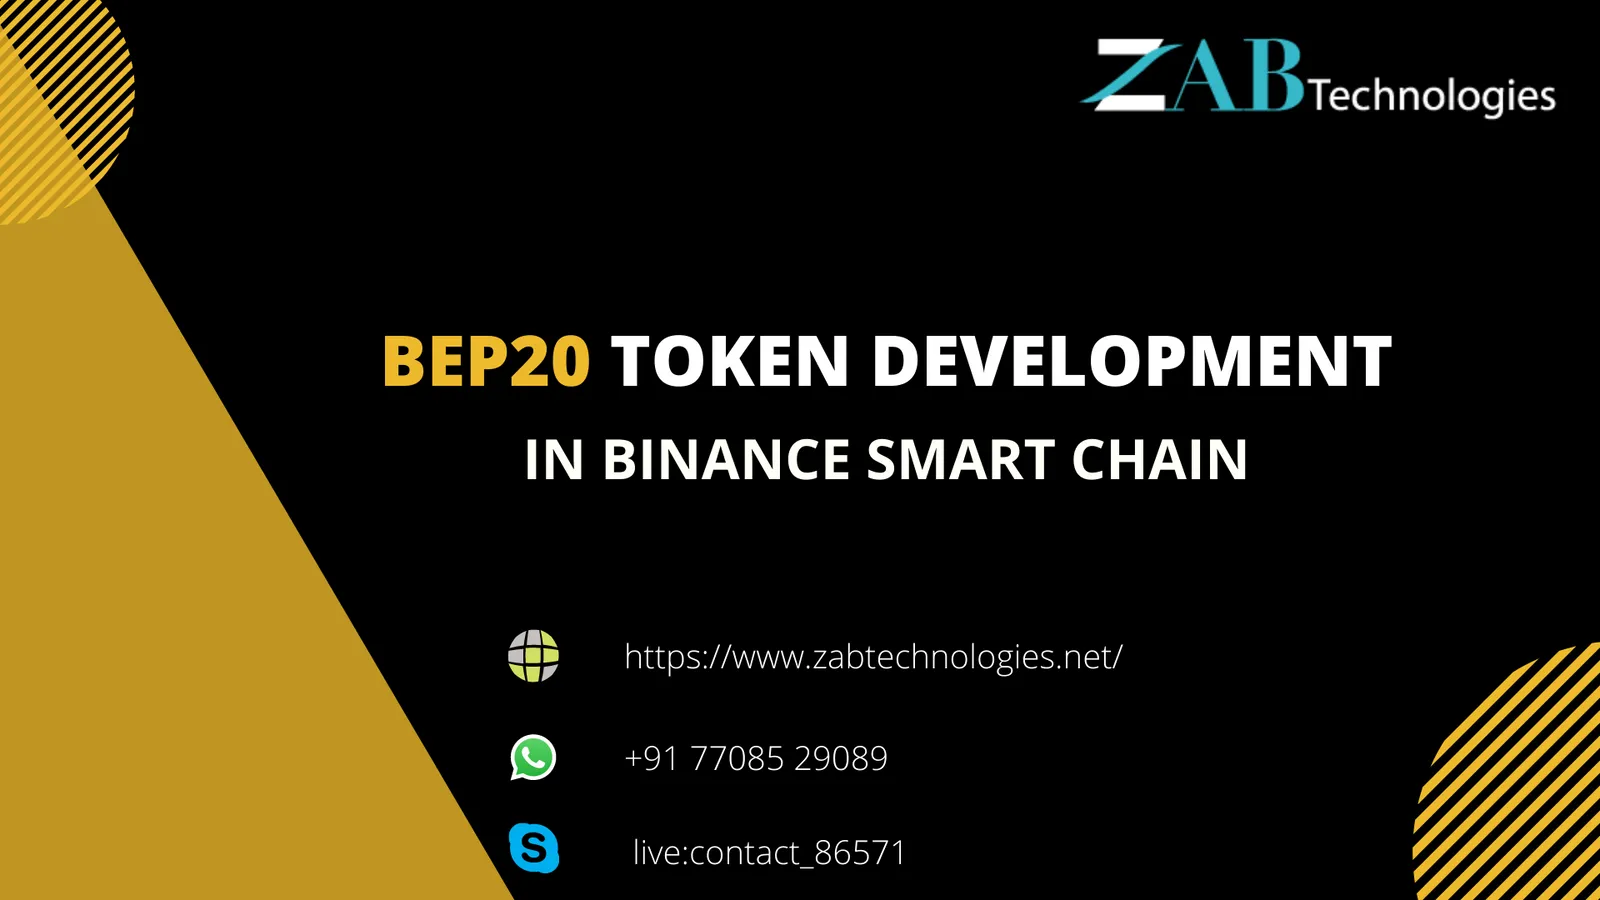 Launch your ICO with BEP20 standard tokens